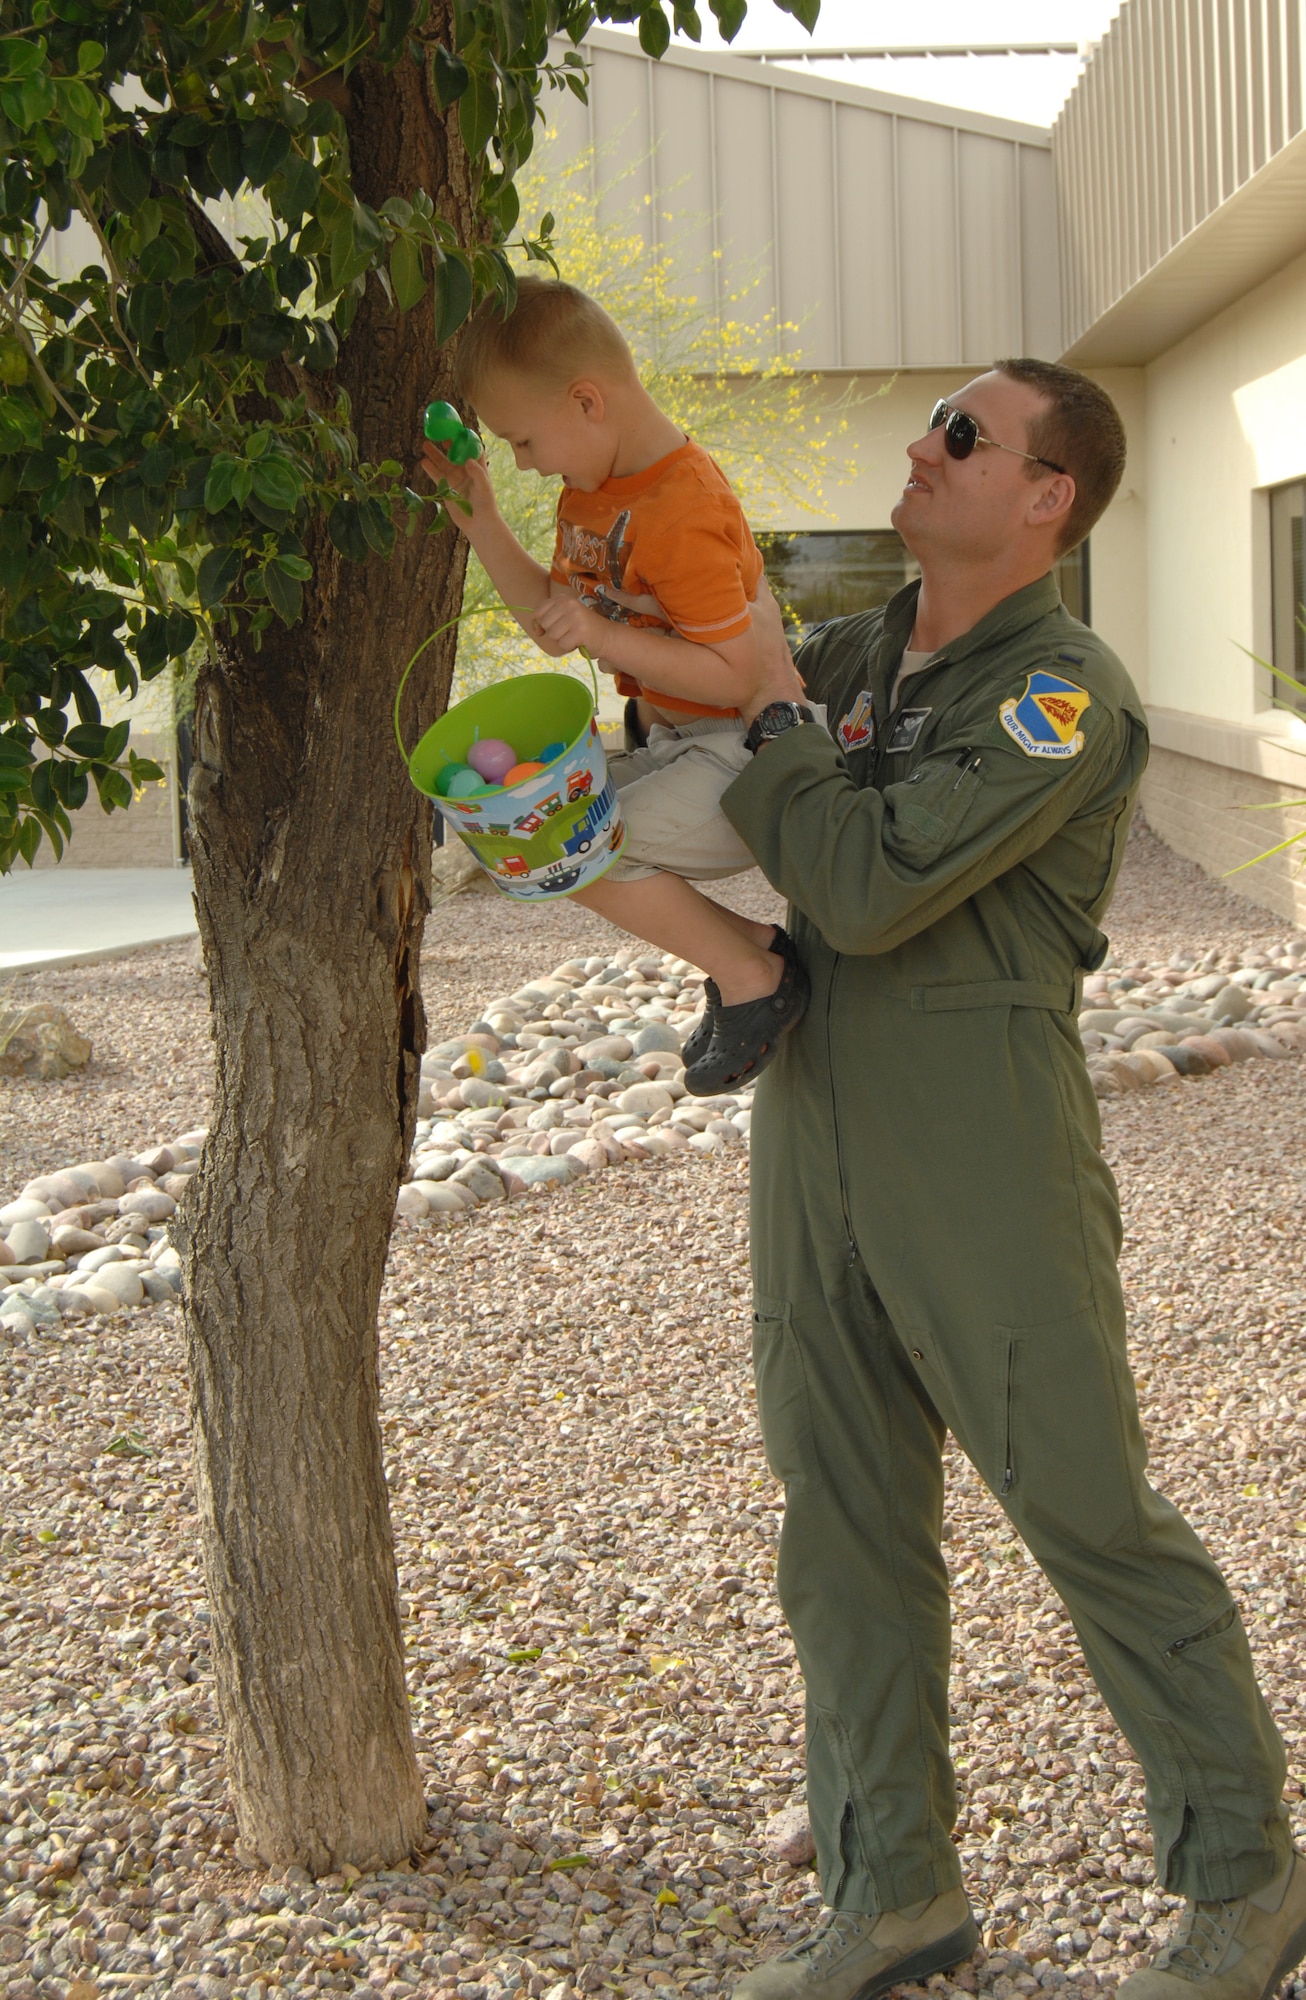 U.S. Air Force 1st Lt. Jared Graham, 355th Training Squadron A-10 pilot, holds up his son, William, as he picks an egg out of a tree at the 358th Fighter Squadron Easter egg hunt on Davis-Monthan Air Force Base, Ariz., April 6. (U.S. Air Force photo by Airman 1st Class Michael Washburn/Released) 